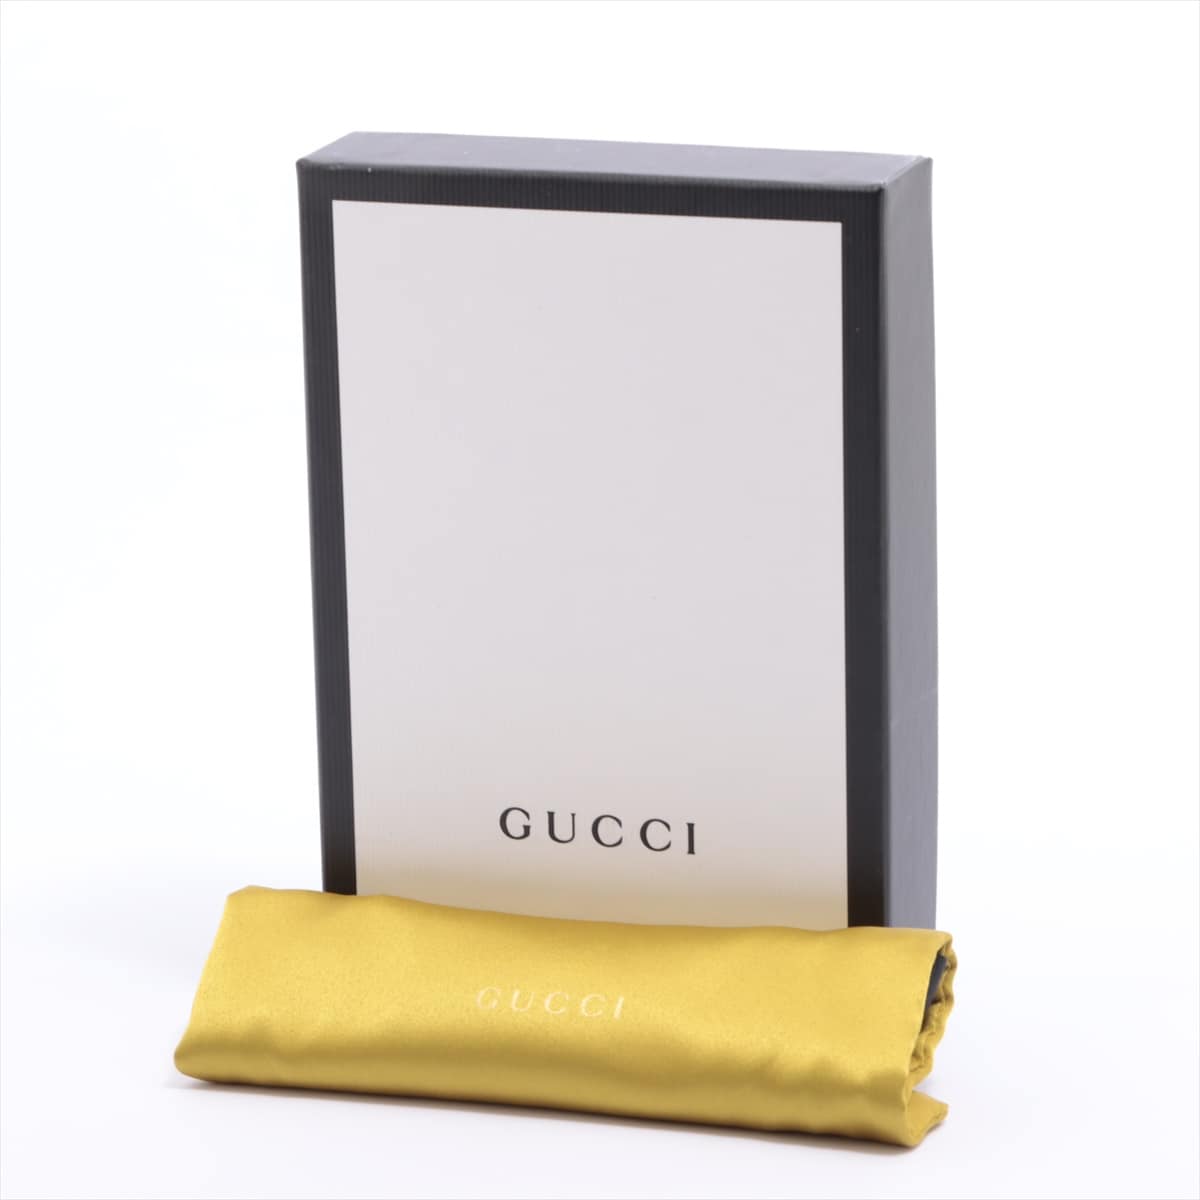 Gucci Grove Snake leather Black